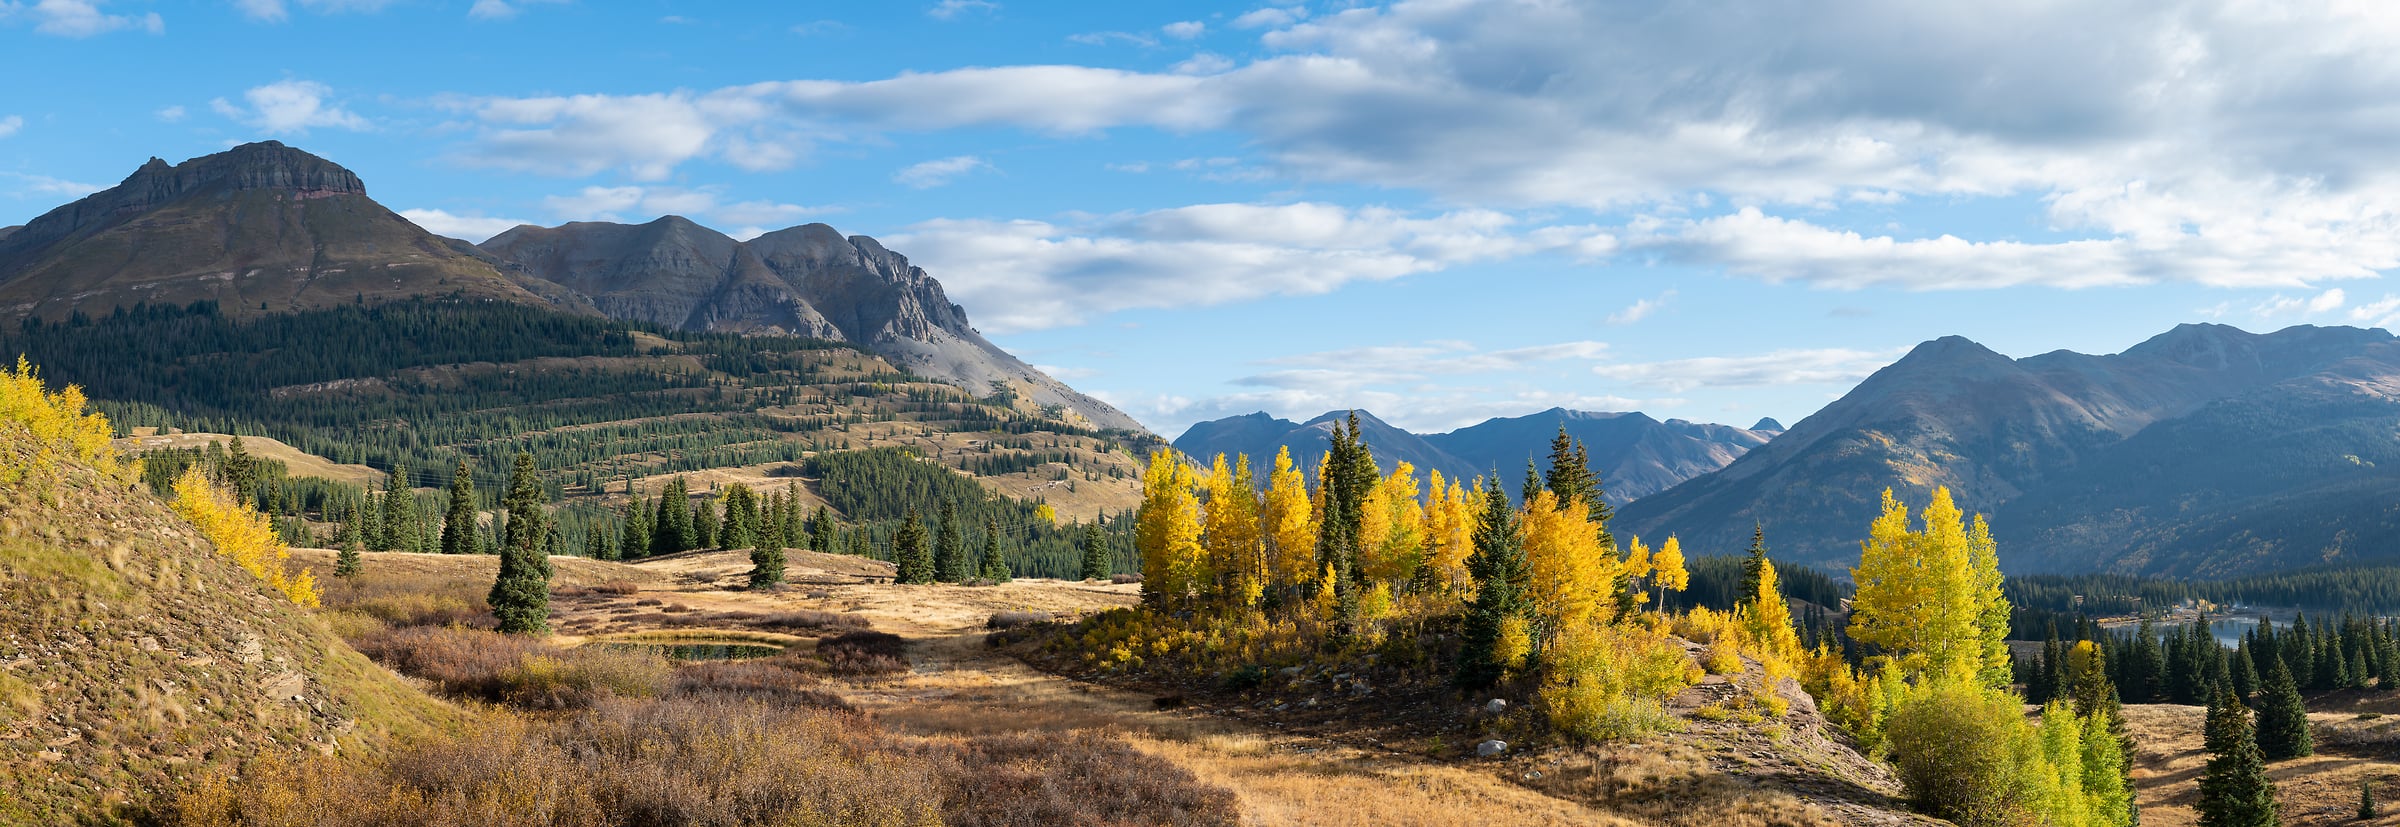 521 megapixels! A very high resolution, large-format VAST photo print of Molas Pass in Colorado in autumn with mountains, trees, fall foliage, and a beautiful blue sky with white puffy clouds; landscape photograph created by Greg Probst in Molas Pass, Colorado.